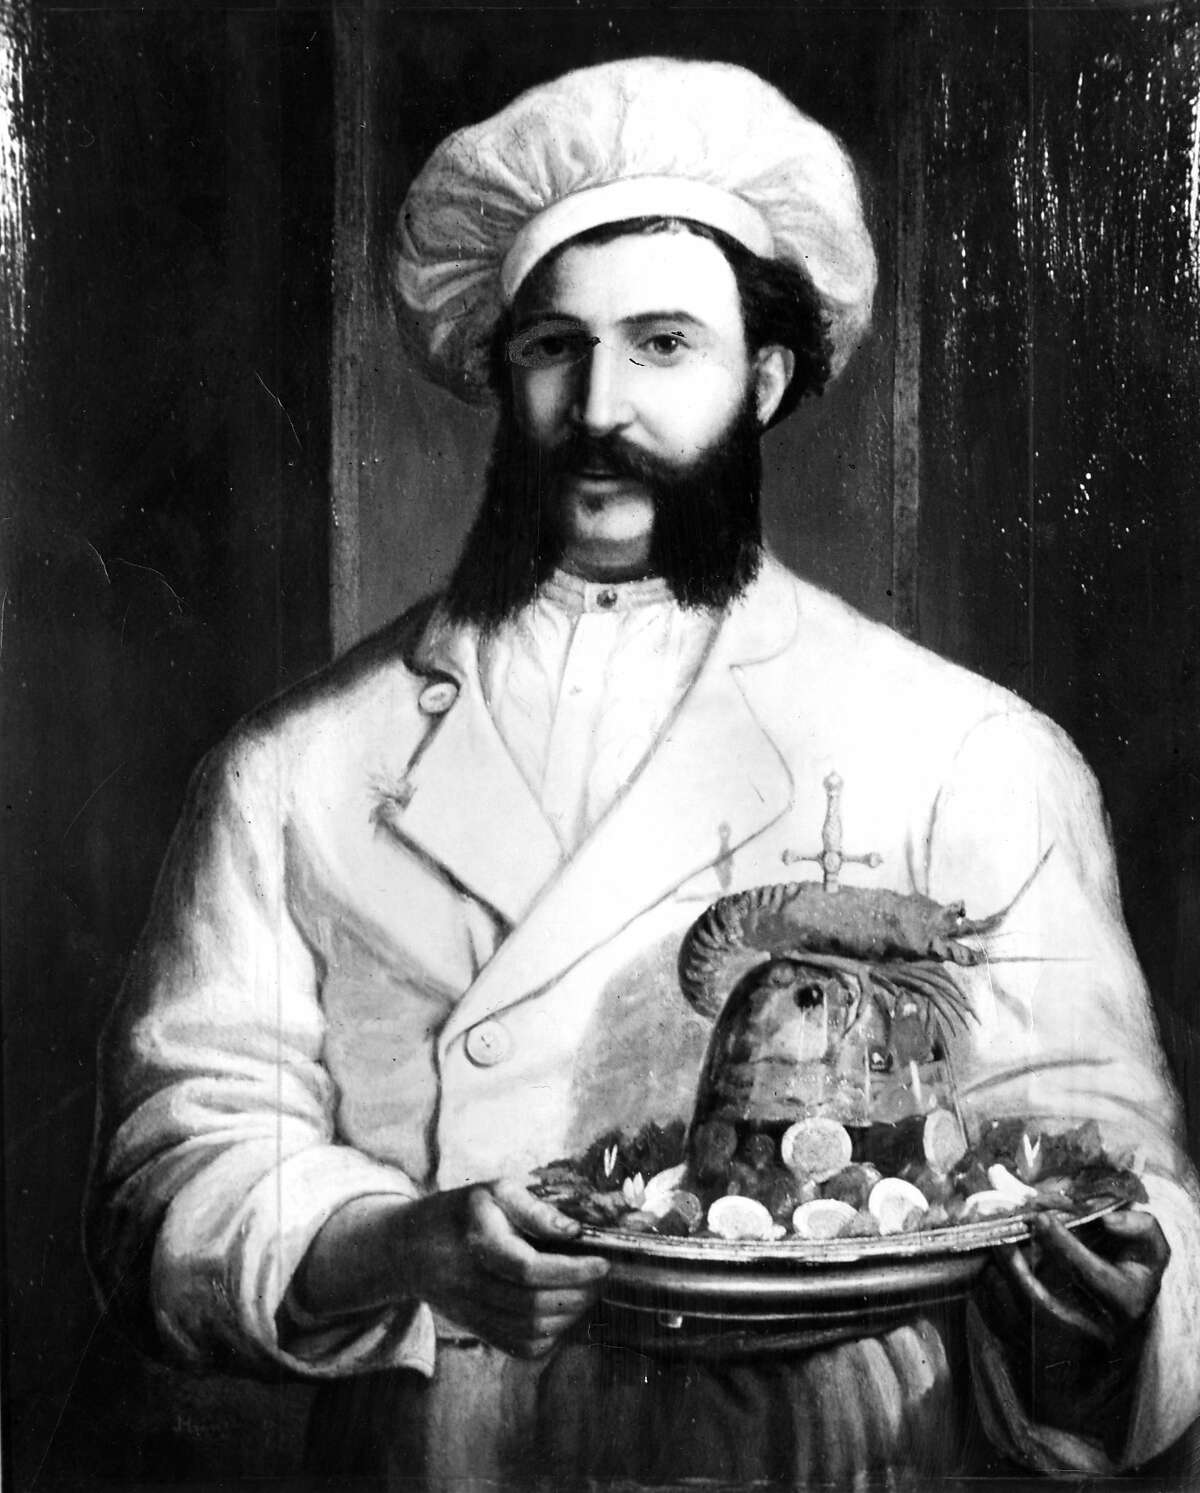 "Chef at the Palace Hotel" is a 1879 painting by San Francisco artist Joseph Harrington. It was on display in the lobby of the hotel.